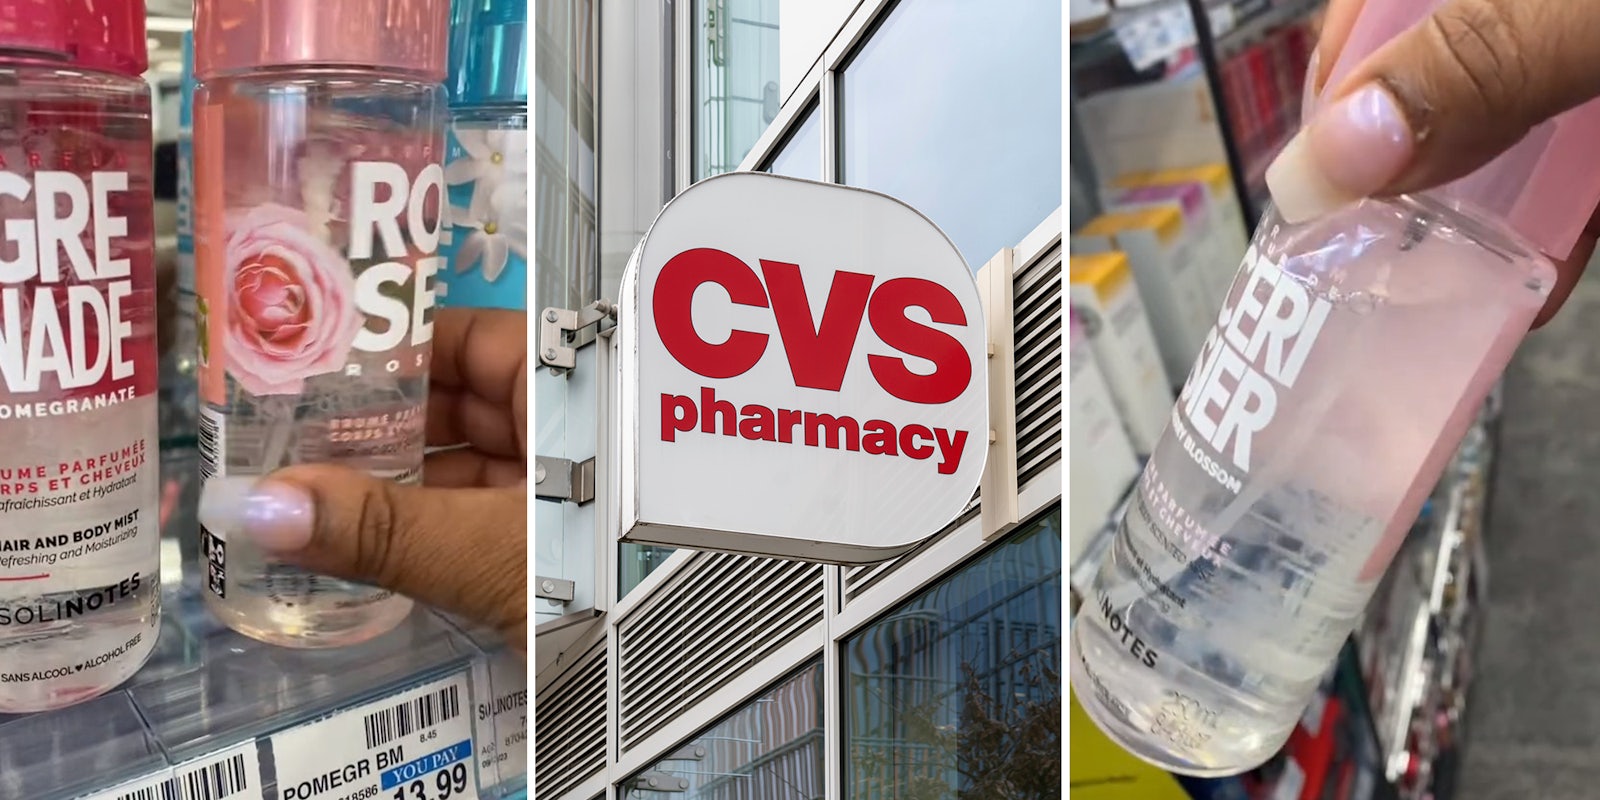 Shopper slams CVS for carrying ‘expired’ beauty products